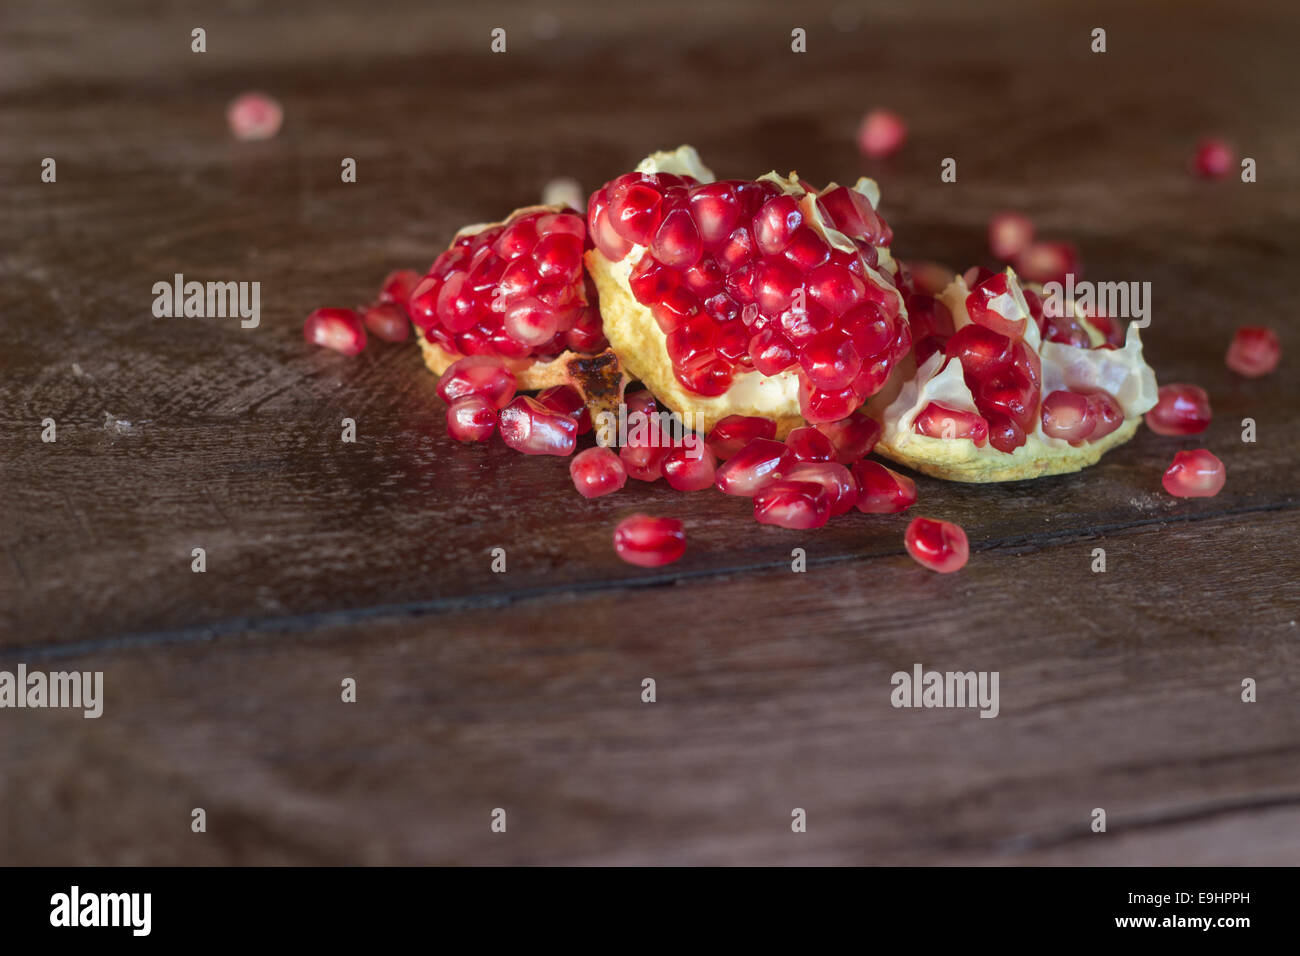 pomegranate seeds red ripe wood wooden 'copy space' Stock Photo